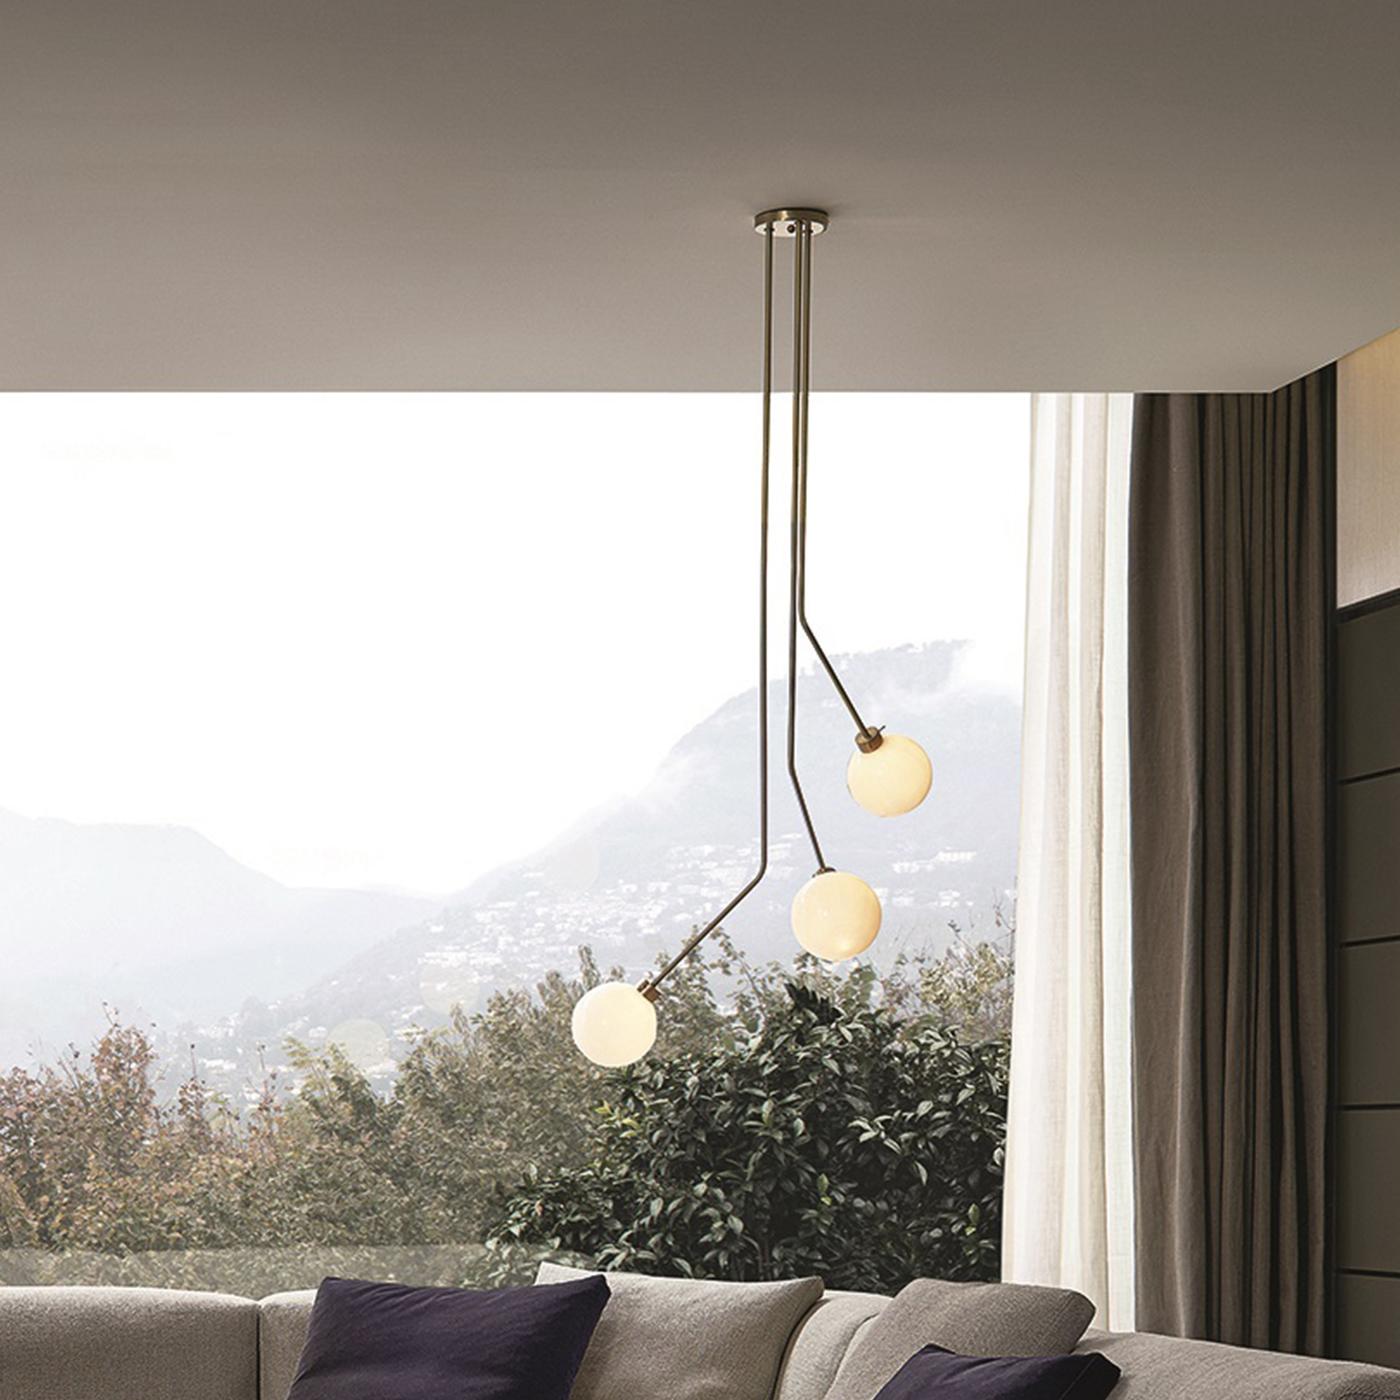 Evoking the charm and elegance of mid-century decor, this ceiling lamp combines traditional materials with a clean silhouette, creating a timeless piece for any home. Both a striking sculptural piece and a functional object, this lamp features a